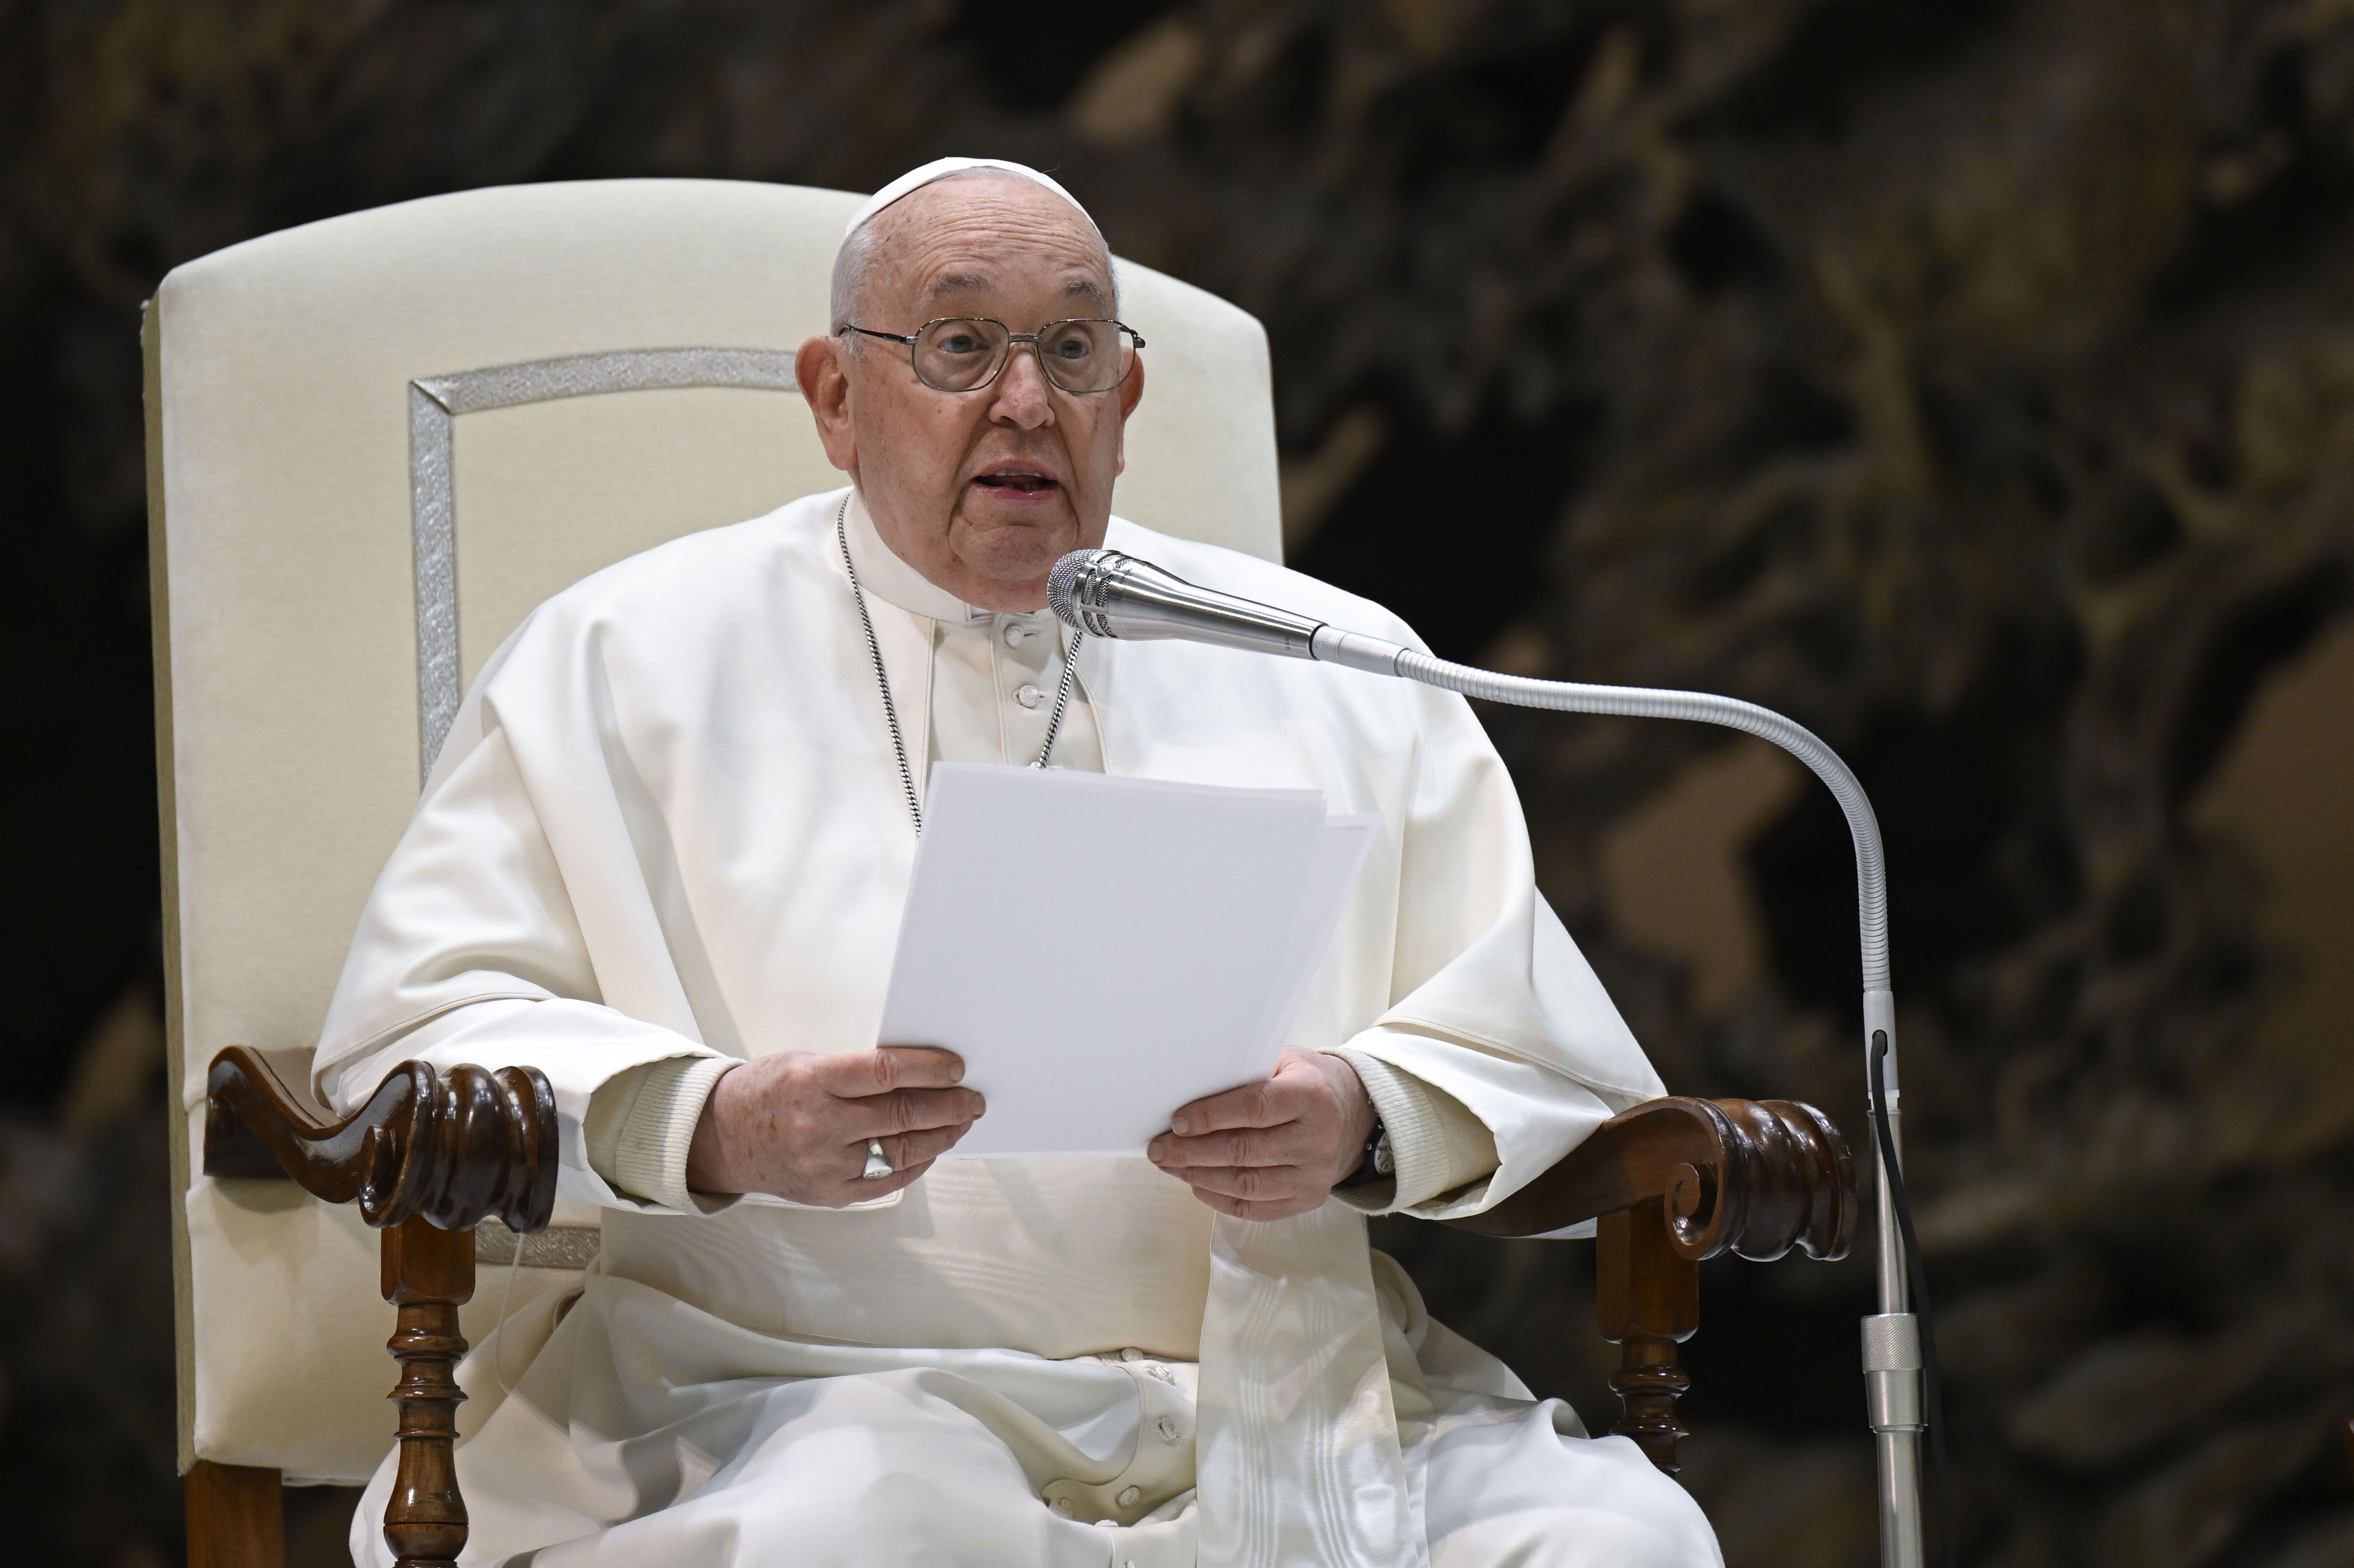 Pope Francis issues new regulations setting spending limits for Vatican offices